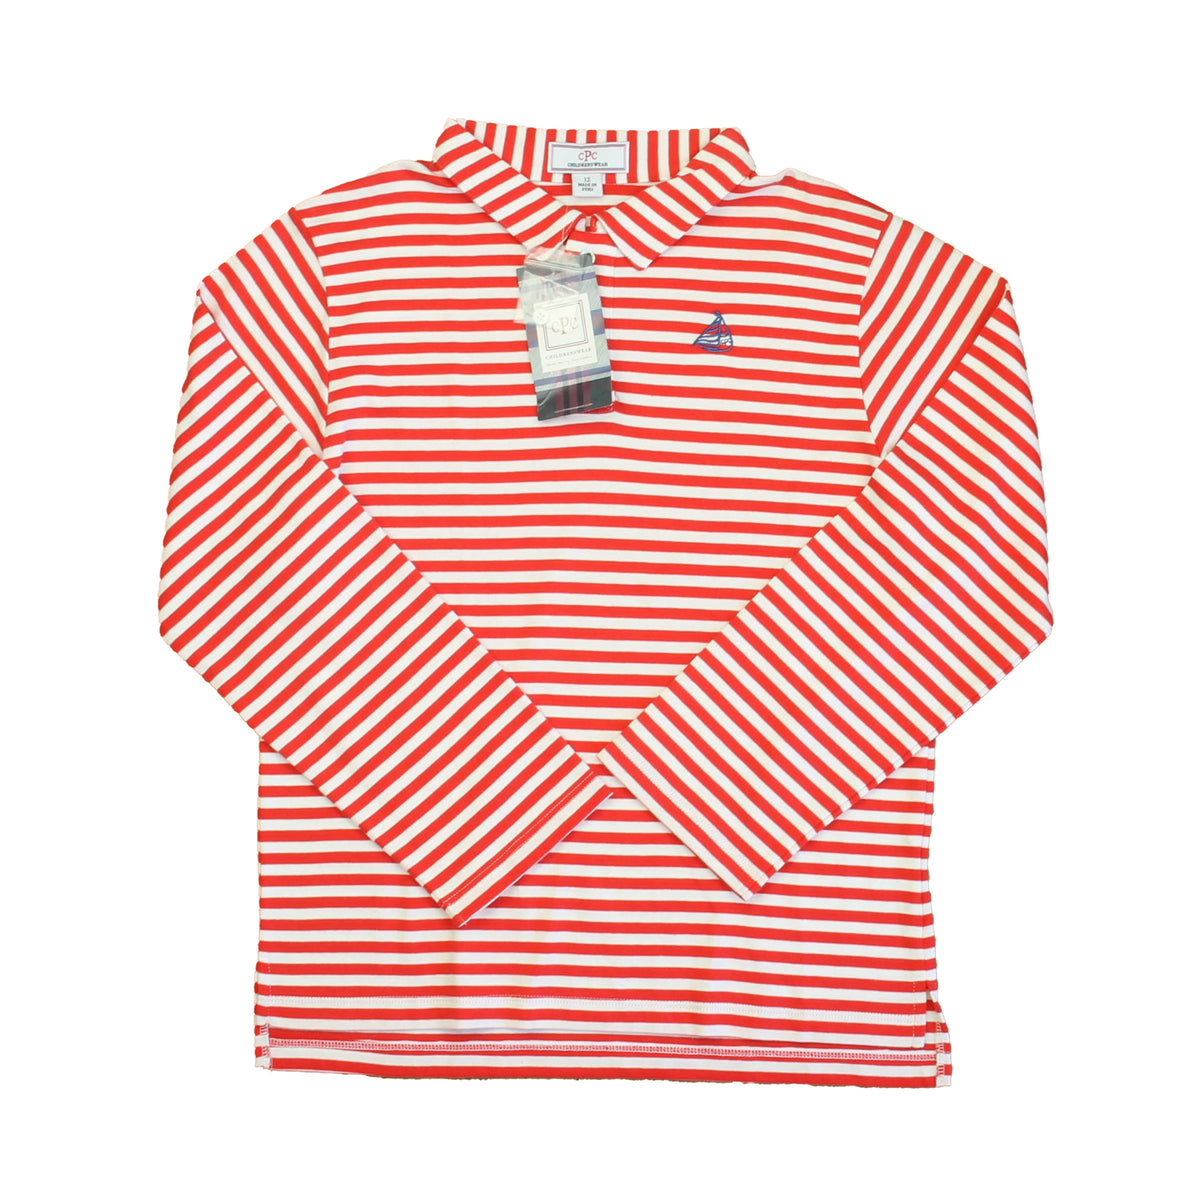 New with Tags: Tomato and White Stripe Top -- FINAL SALE